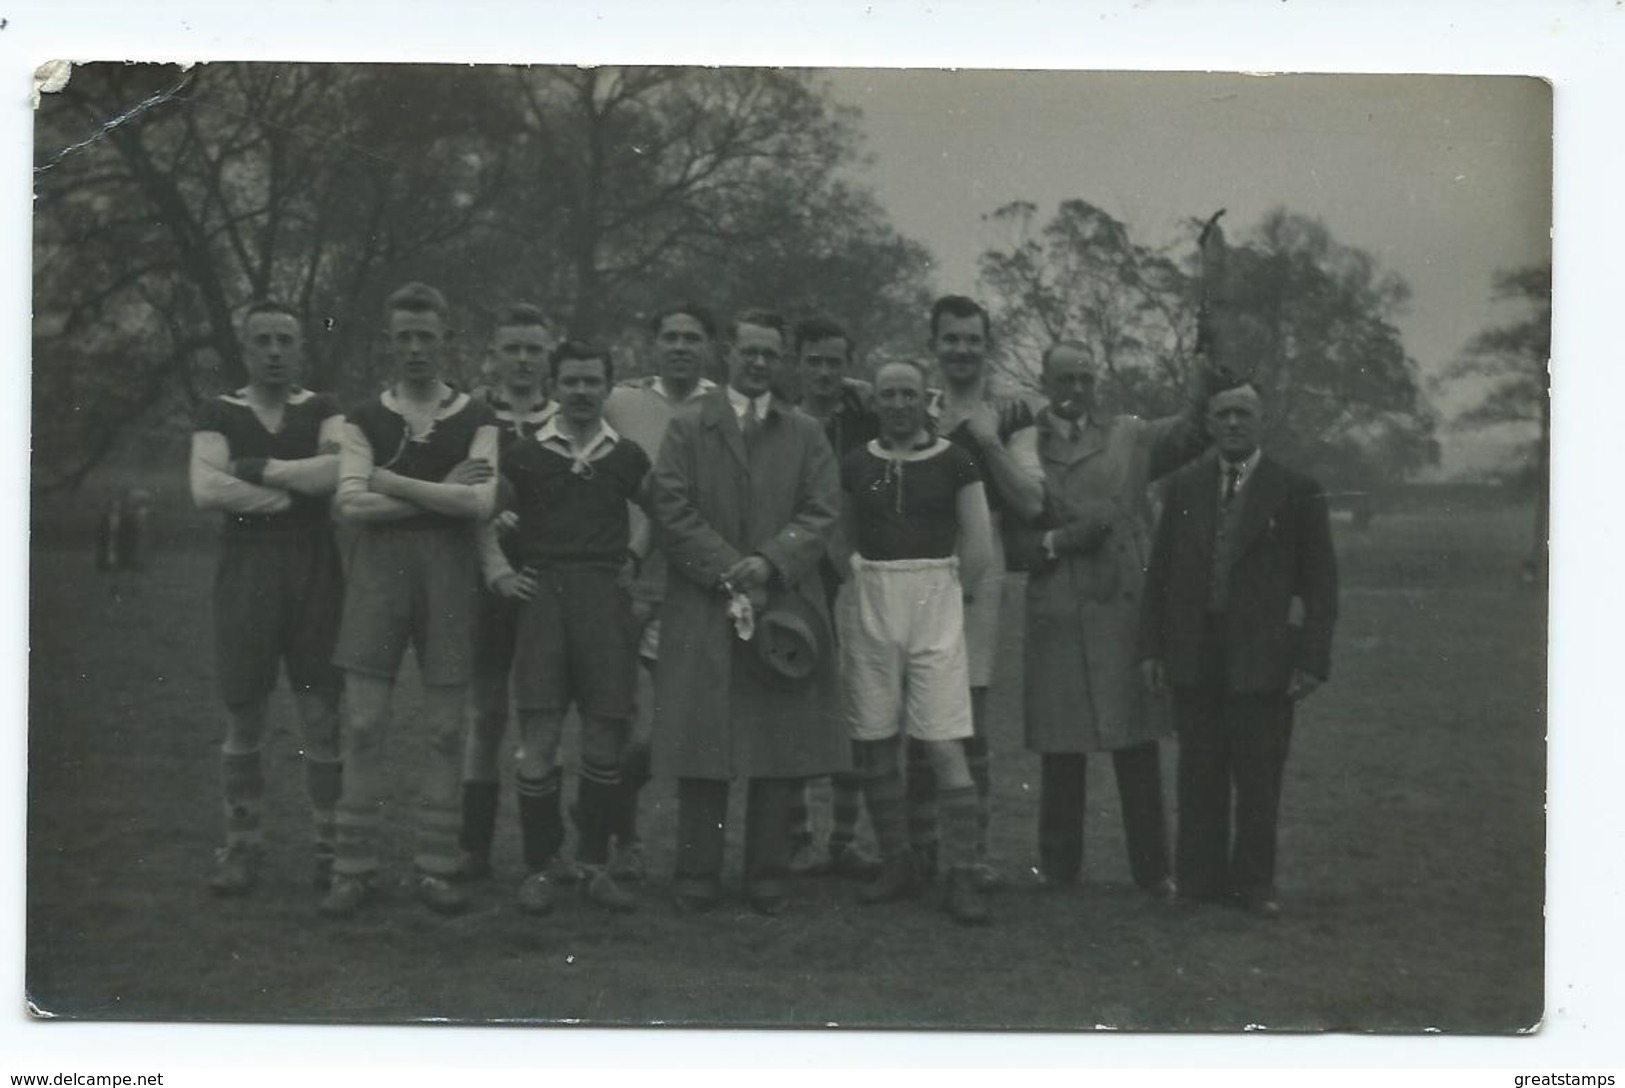 . Genealogy Group Sutton Coldfield Rp Unused Footballers Probably Sutton Park. - Genealogy